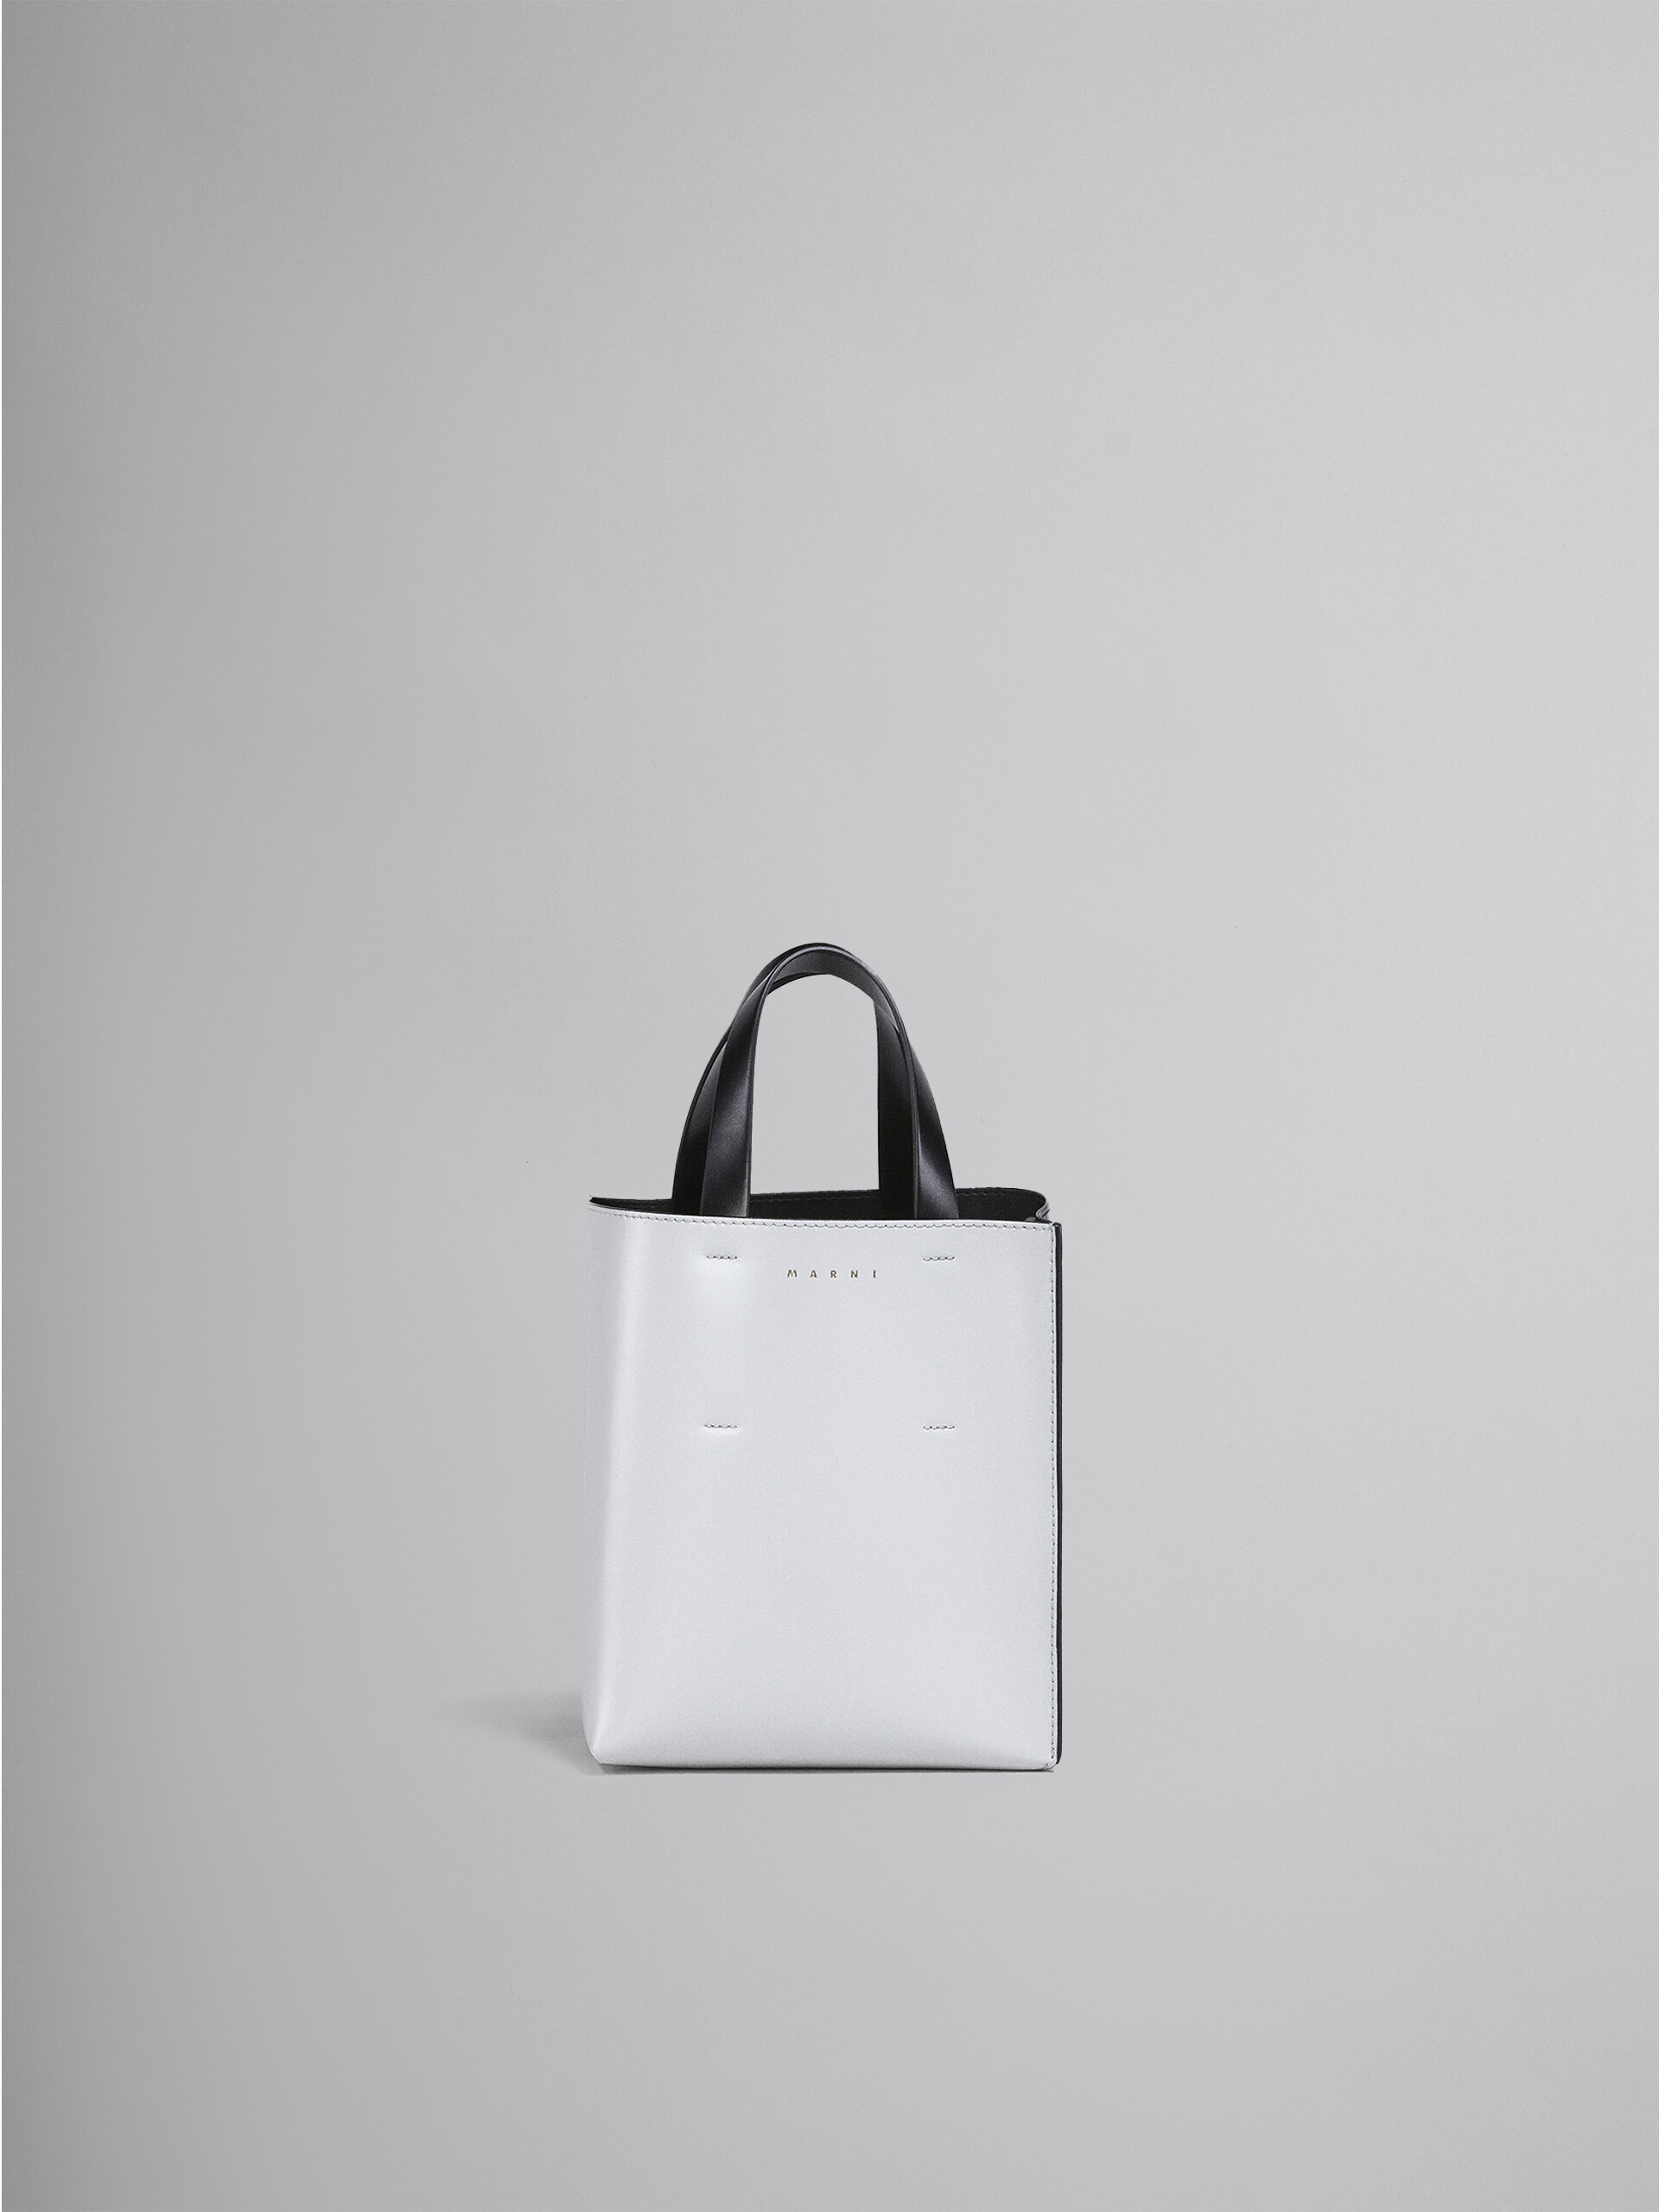 MUSEO mini bag in white and black leather - Shopping Bags - Image 1